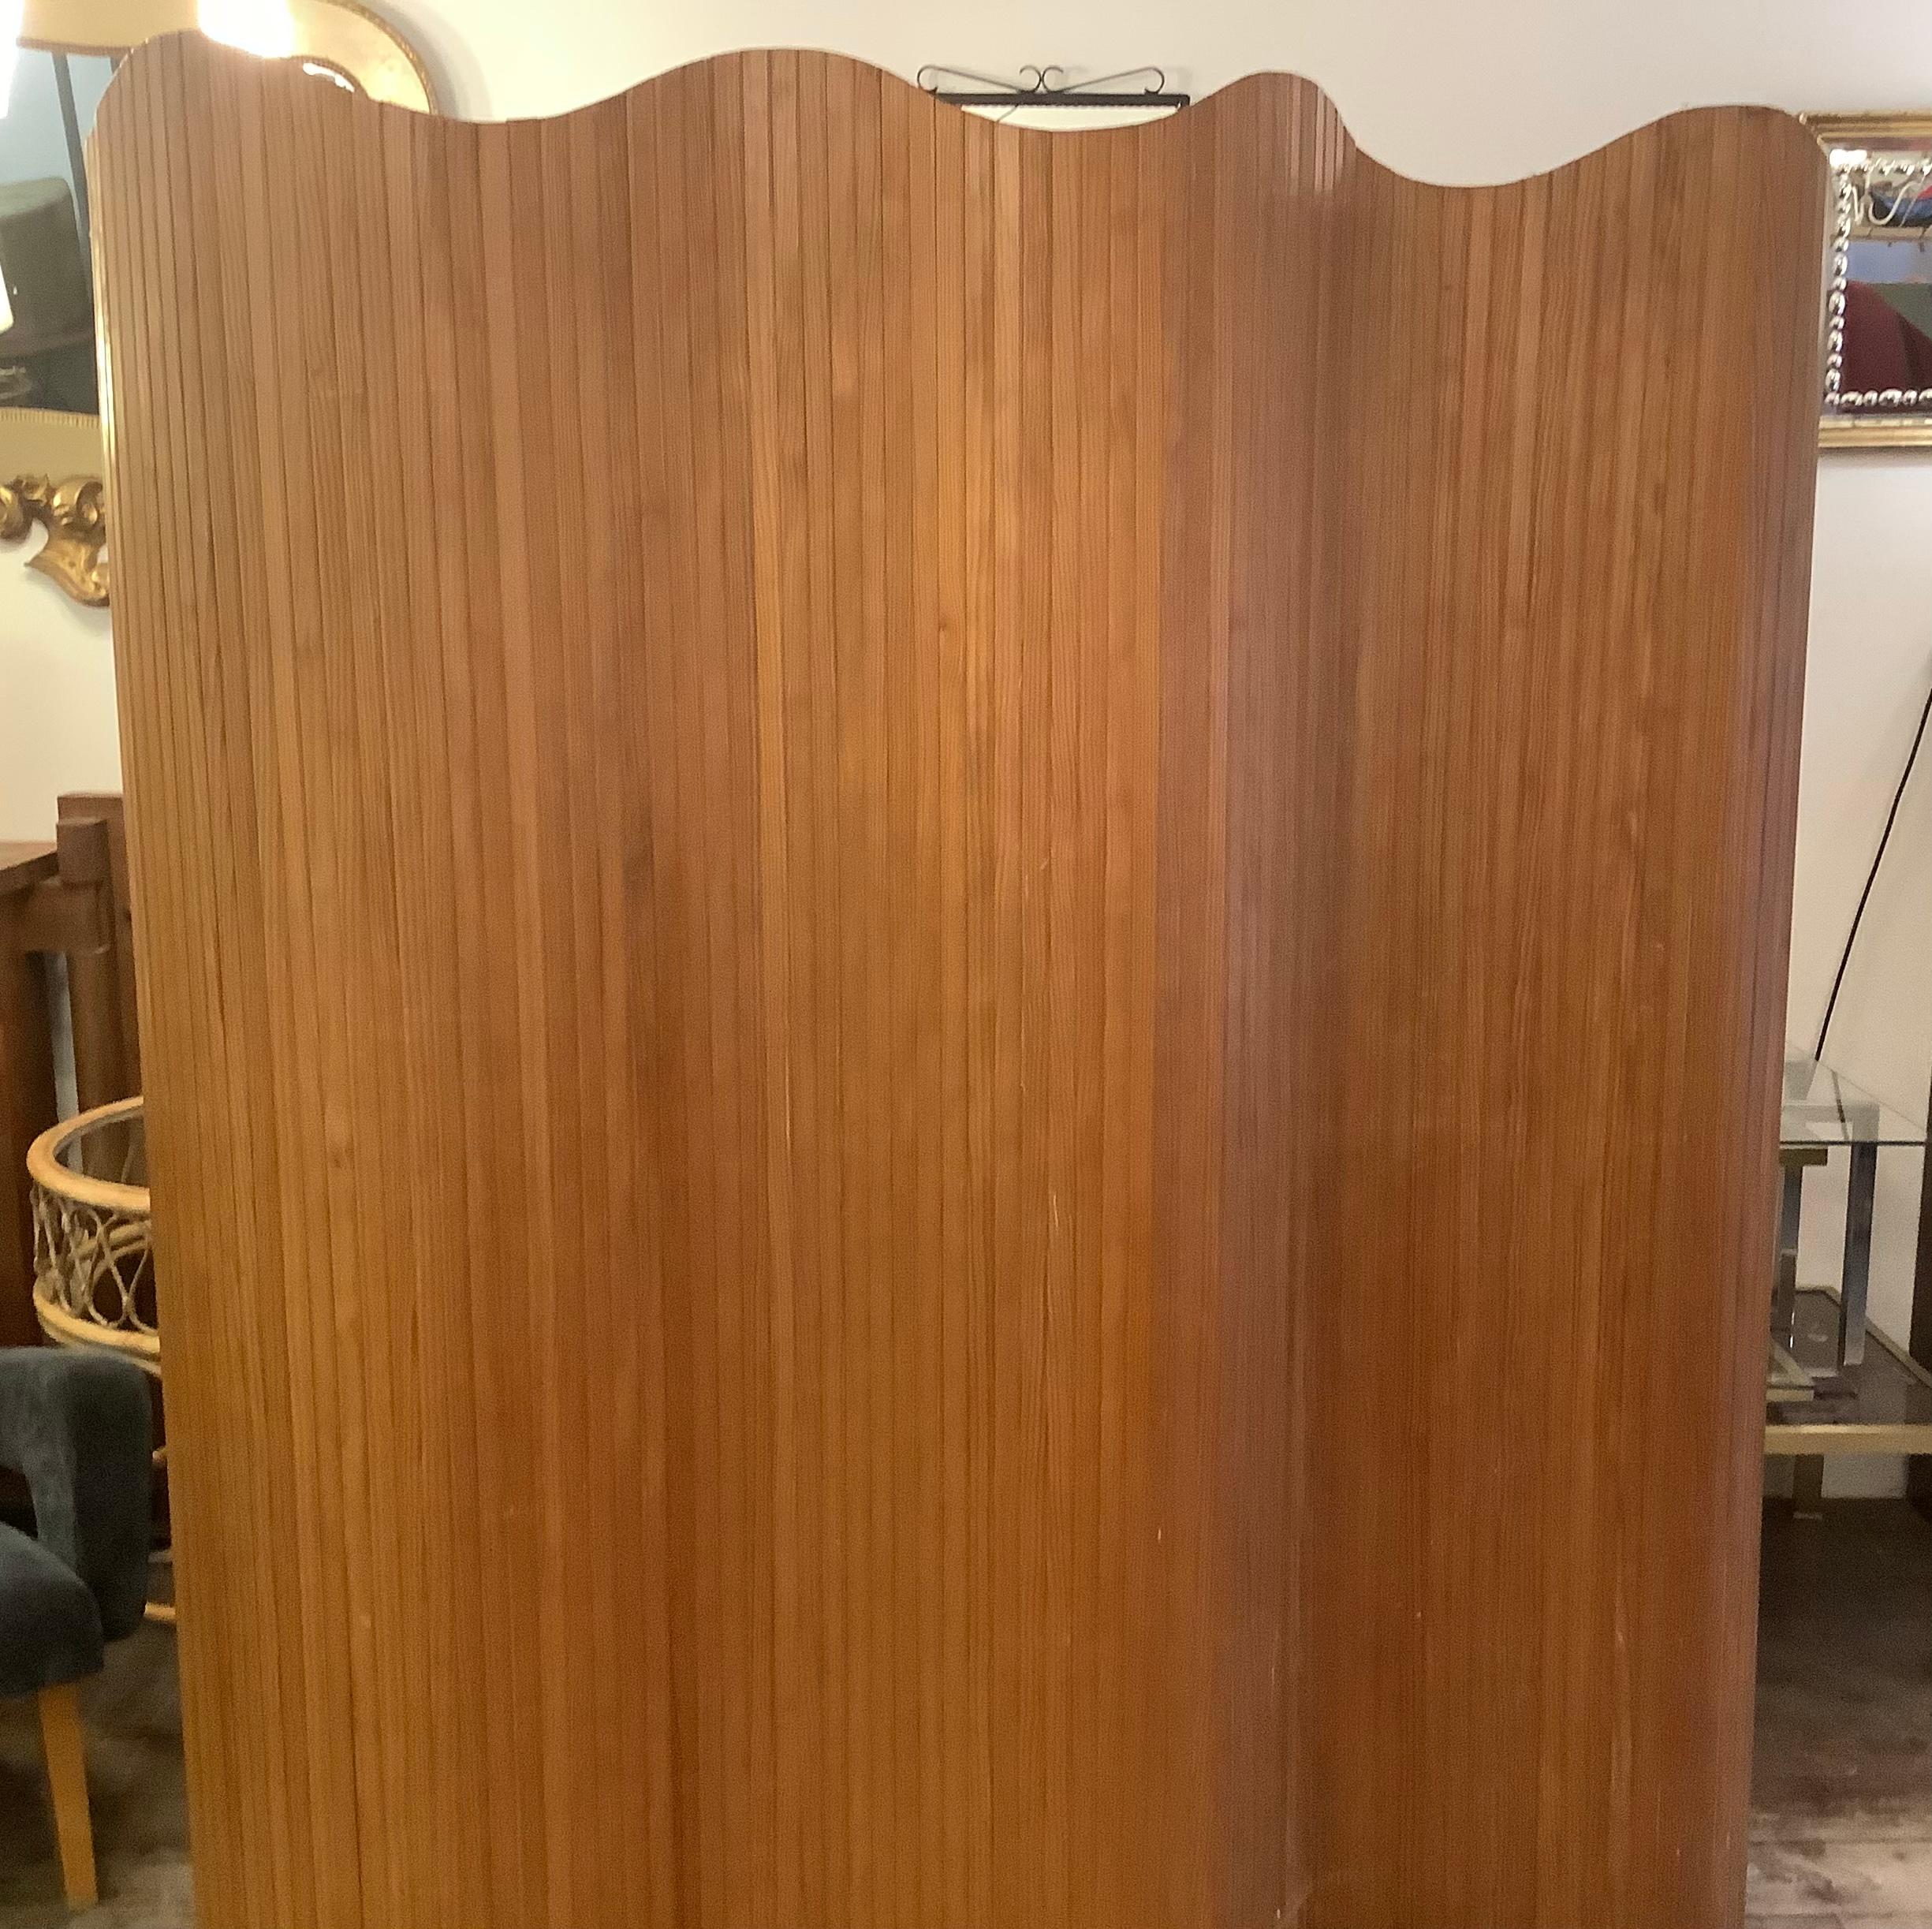 1940s Free-standing floor screen designed by Jomain Baumann.
This beautifully made screen is in good vintage condition.
The screen can be folded coiled or extended into any position.